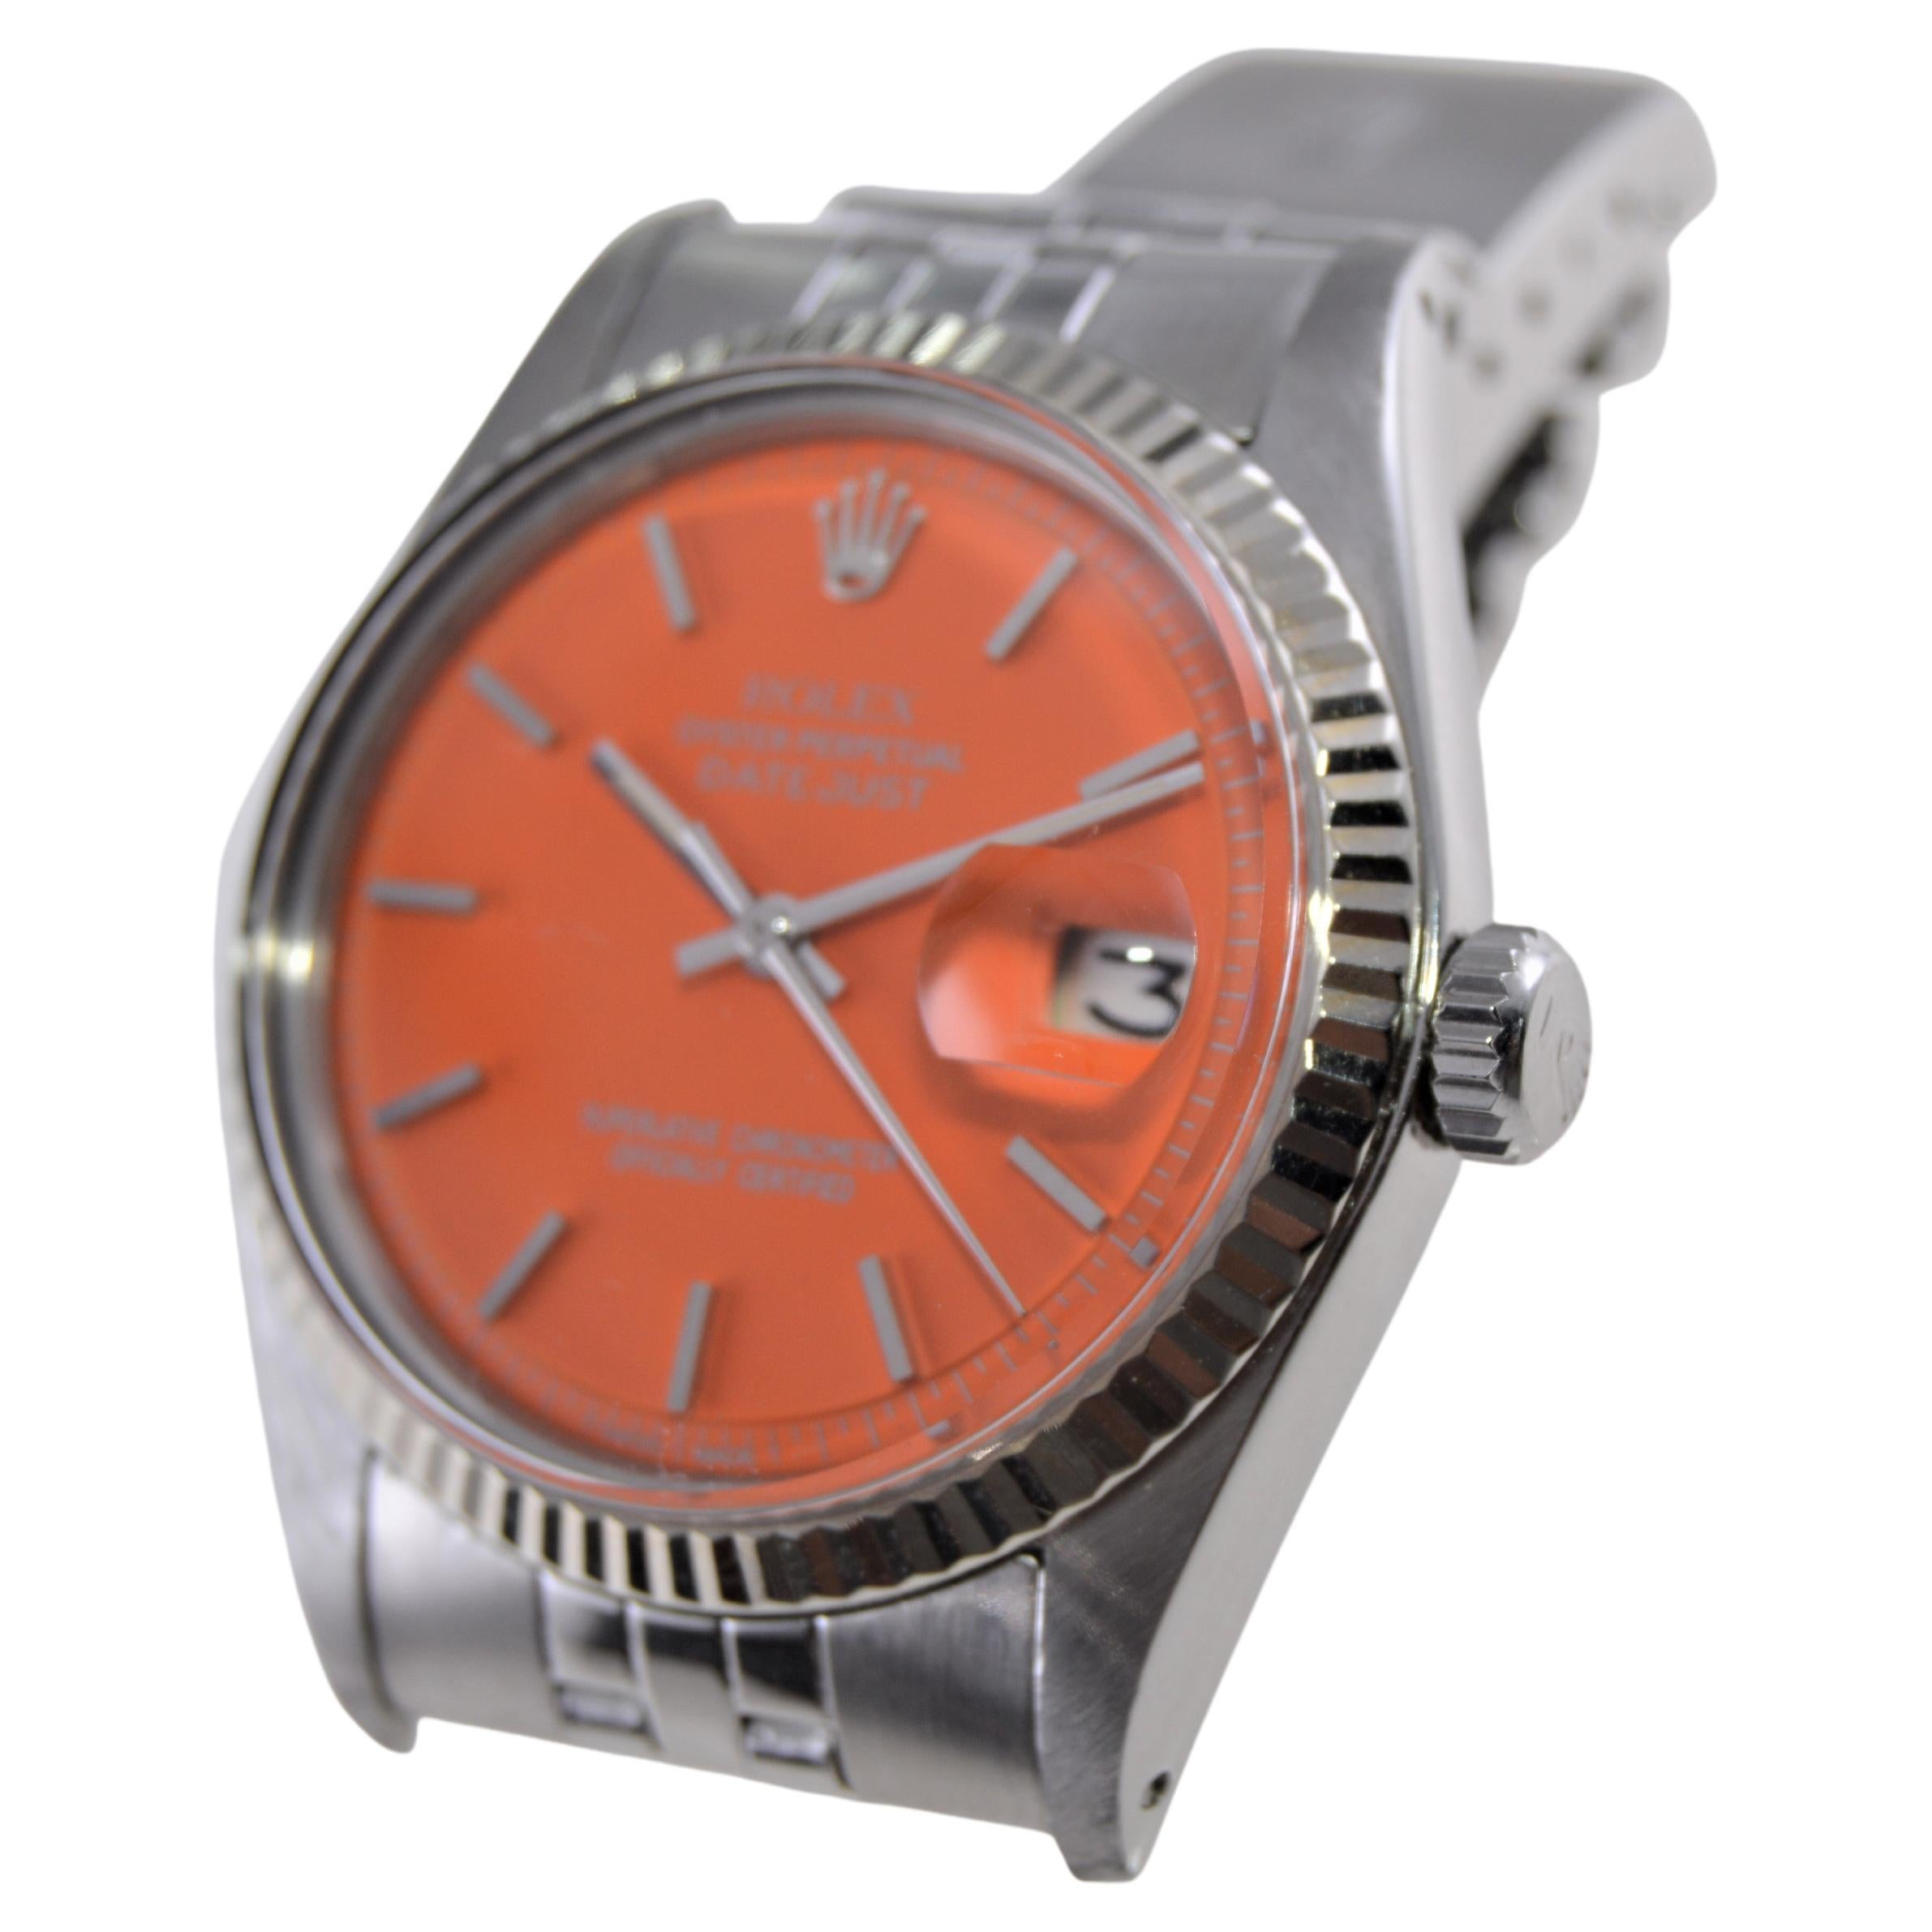 Rolex Oyster Perpetual Datejust With Custom Orange Dial, 1970's In Excellent Condition For Sale In Long Beach, CA